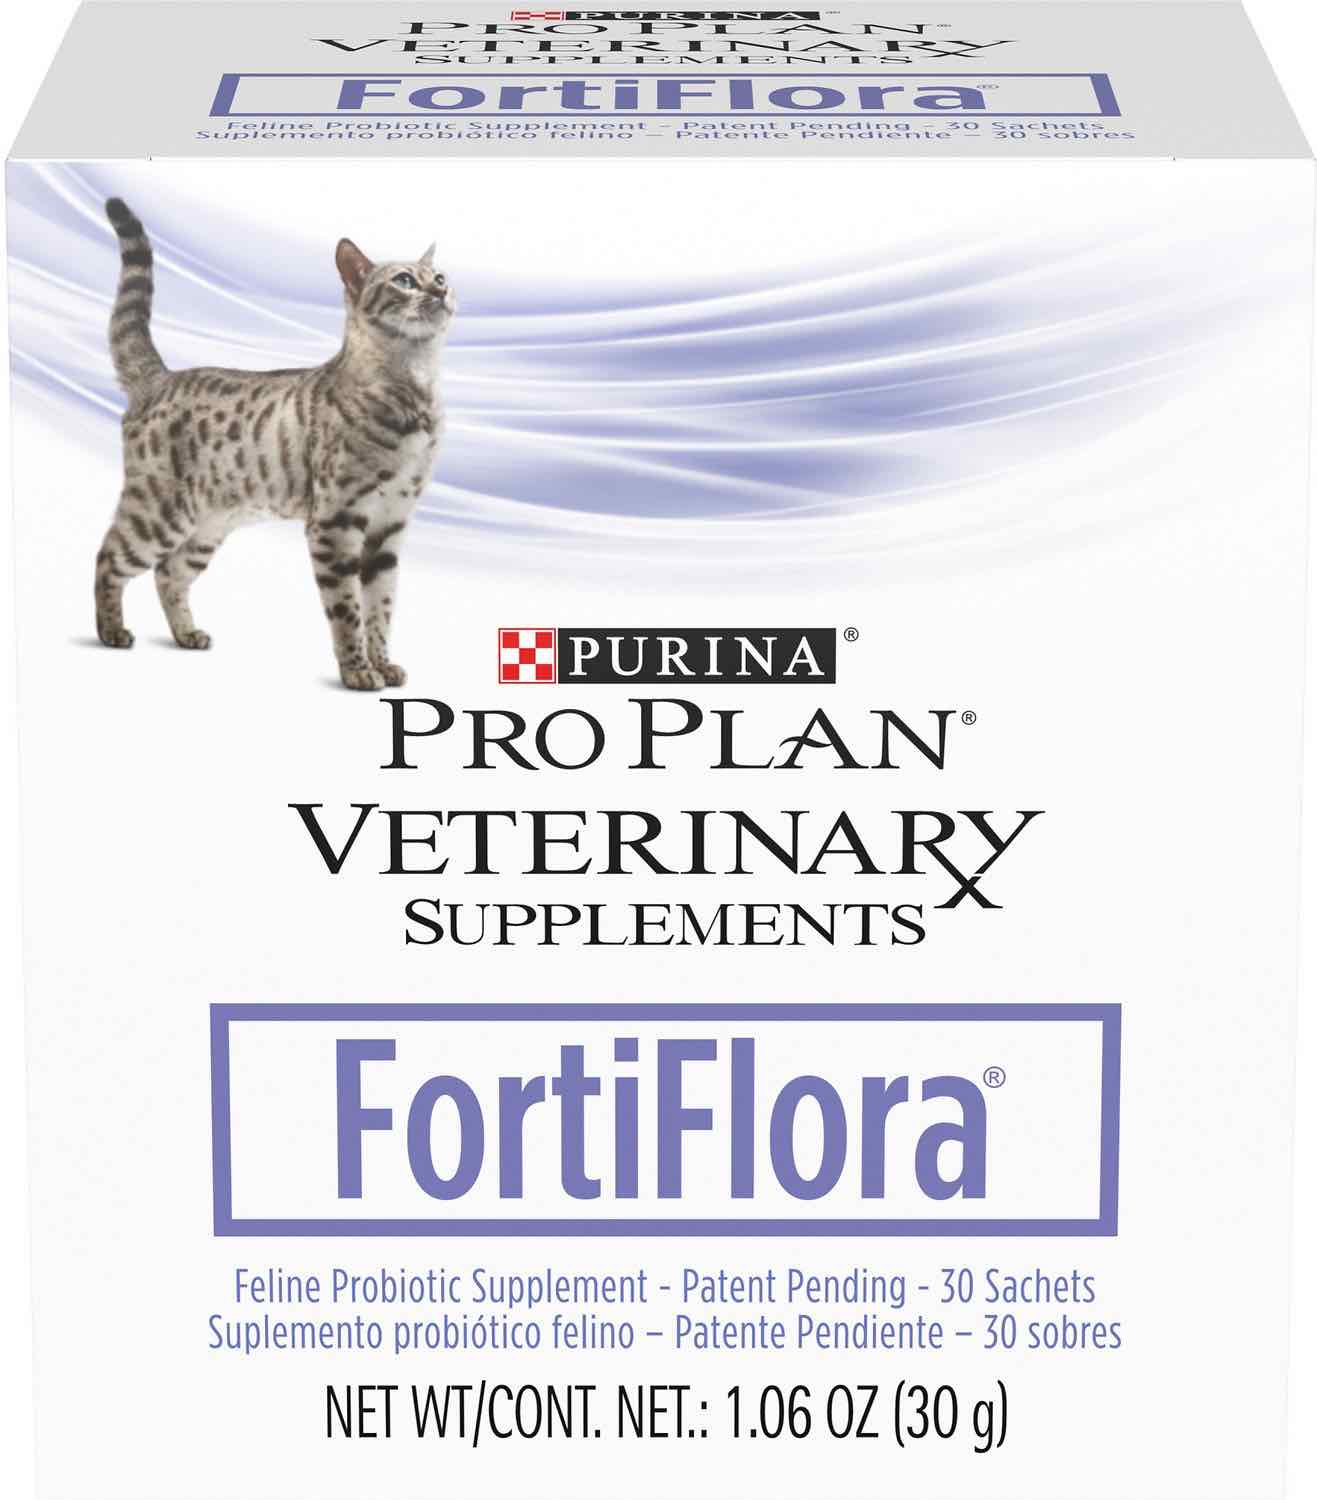 Purina Pro Plan Veterinary Supplements FortiFlora Powder for Cats box of 30 sachets 1